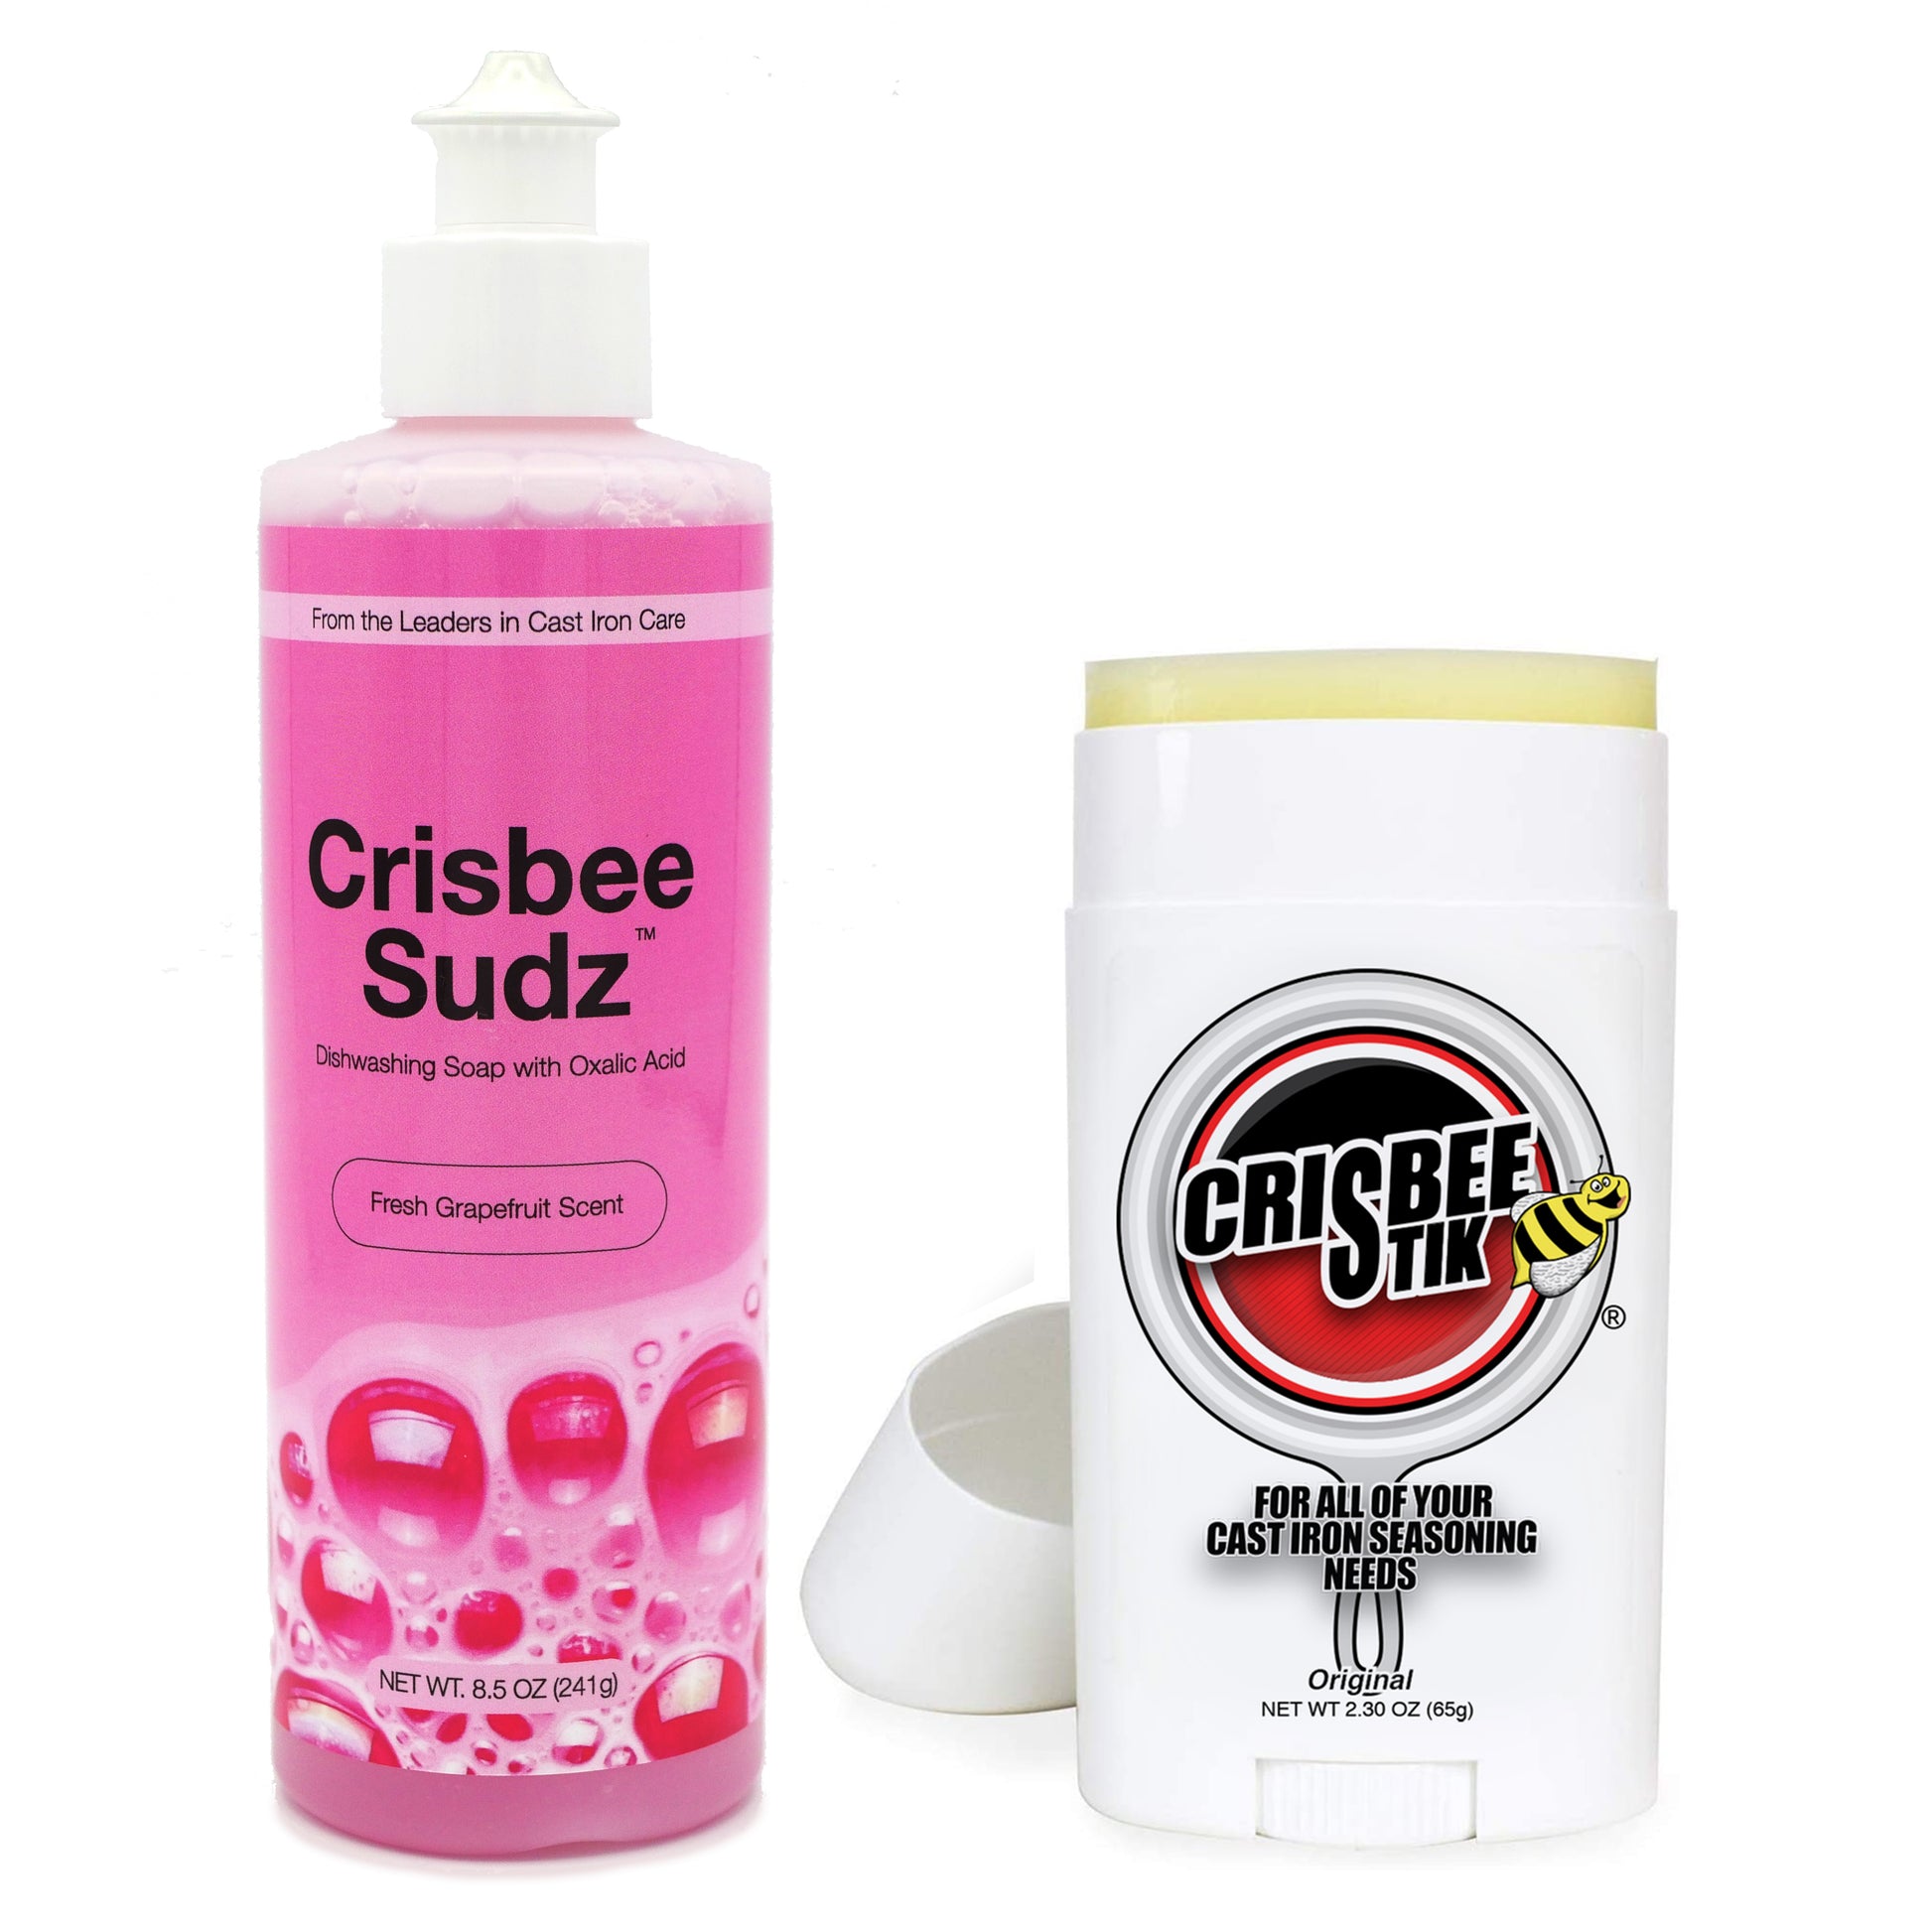 Crisbee Sudz and Crisbee Stik Display cast iron cleaning and seasoning kit from Crisbee